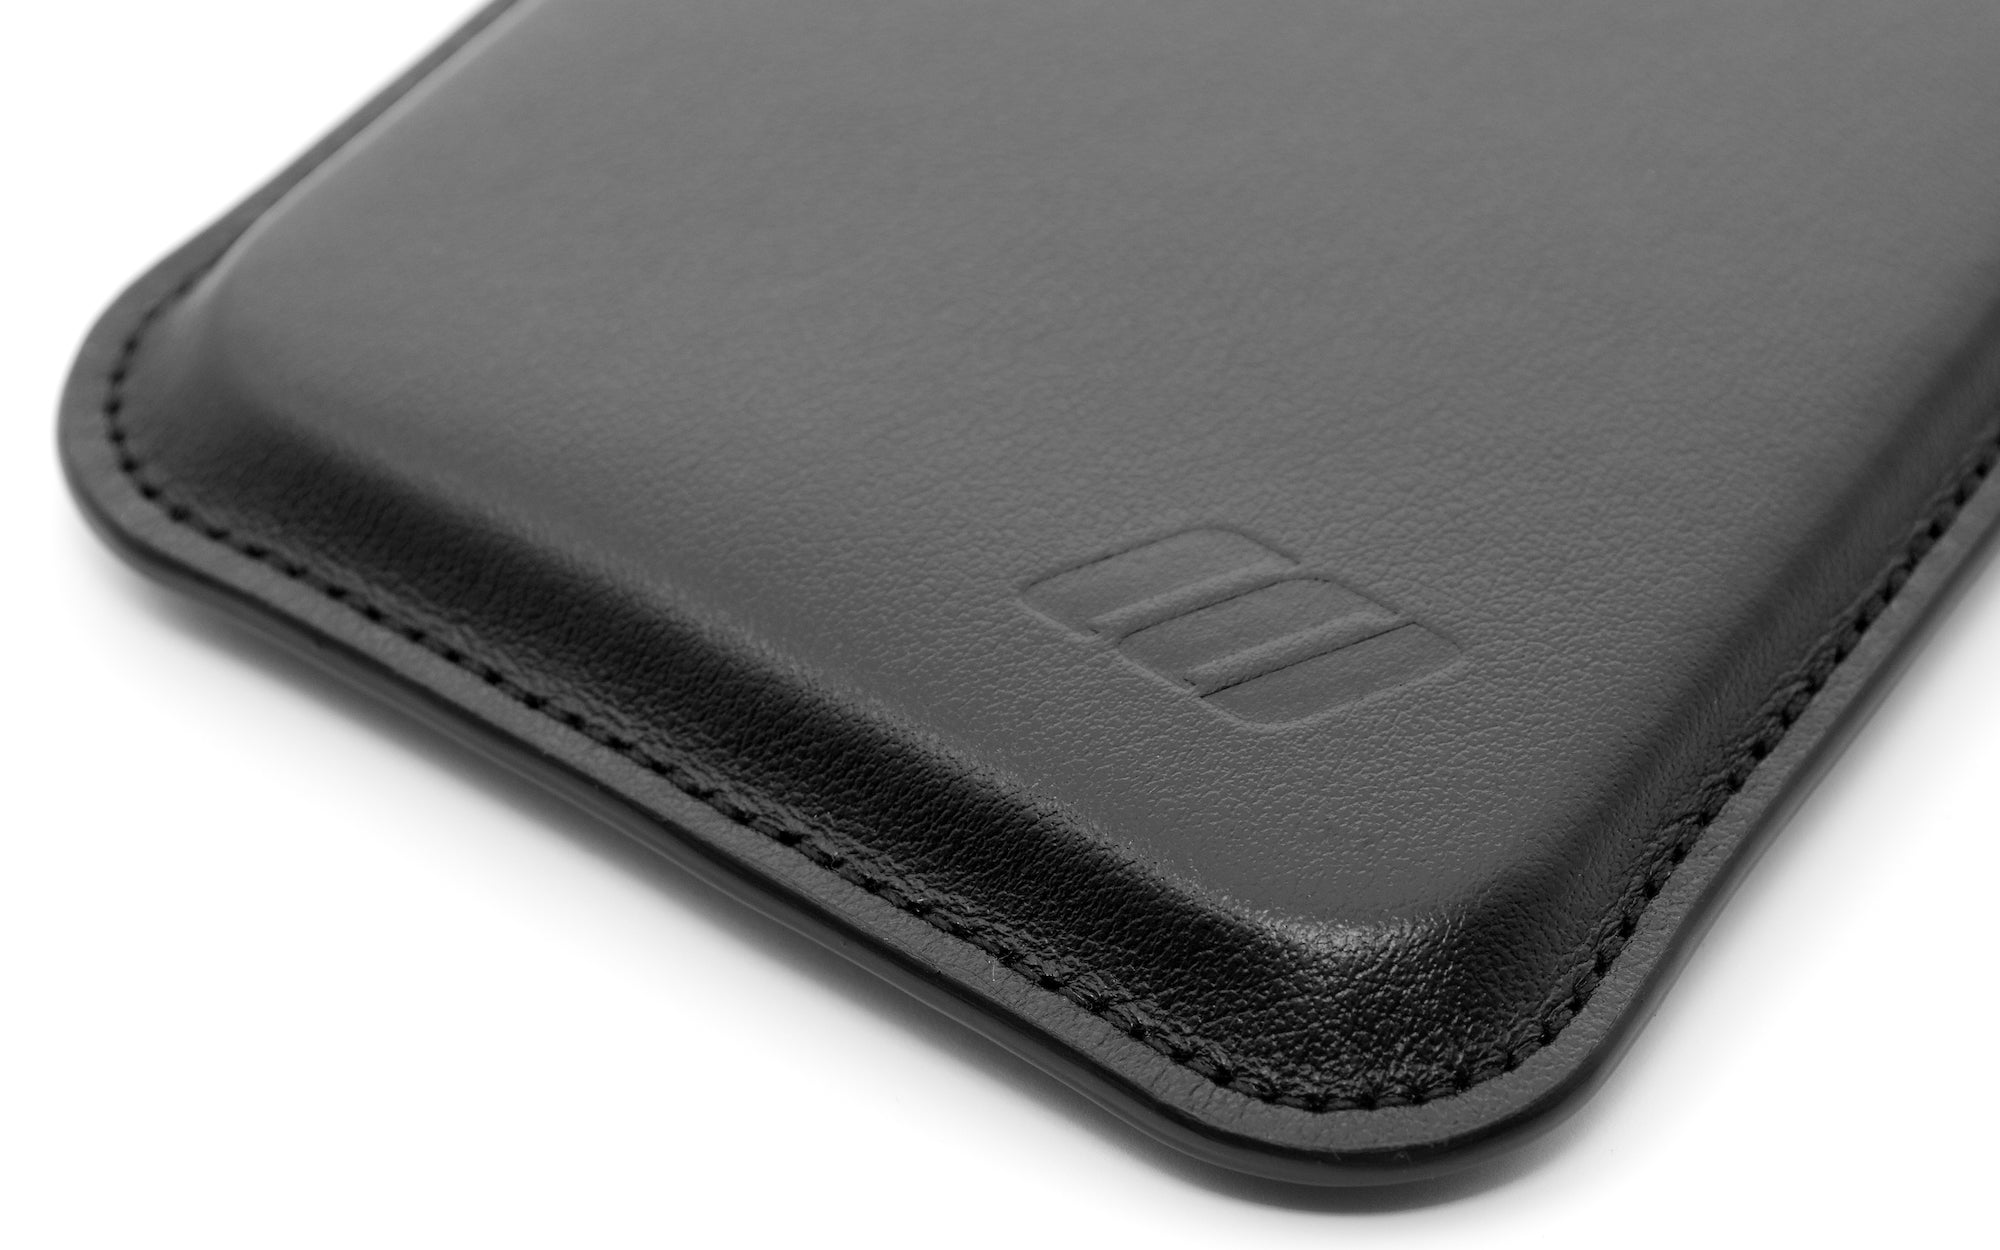 iPhone 12 Leather Case Pouch - Skinny Fit - Black